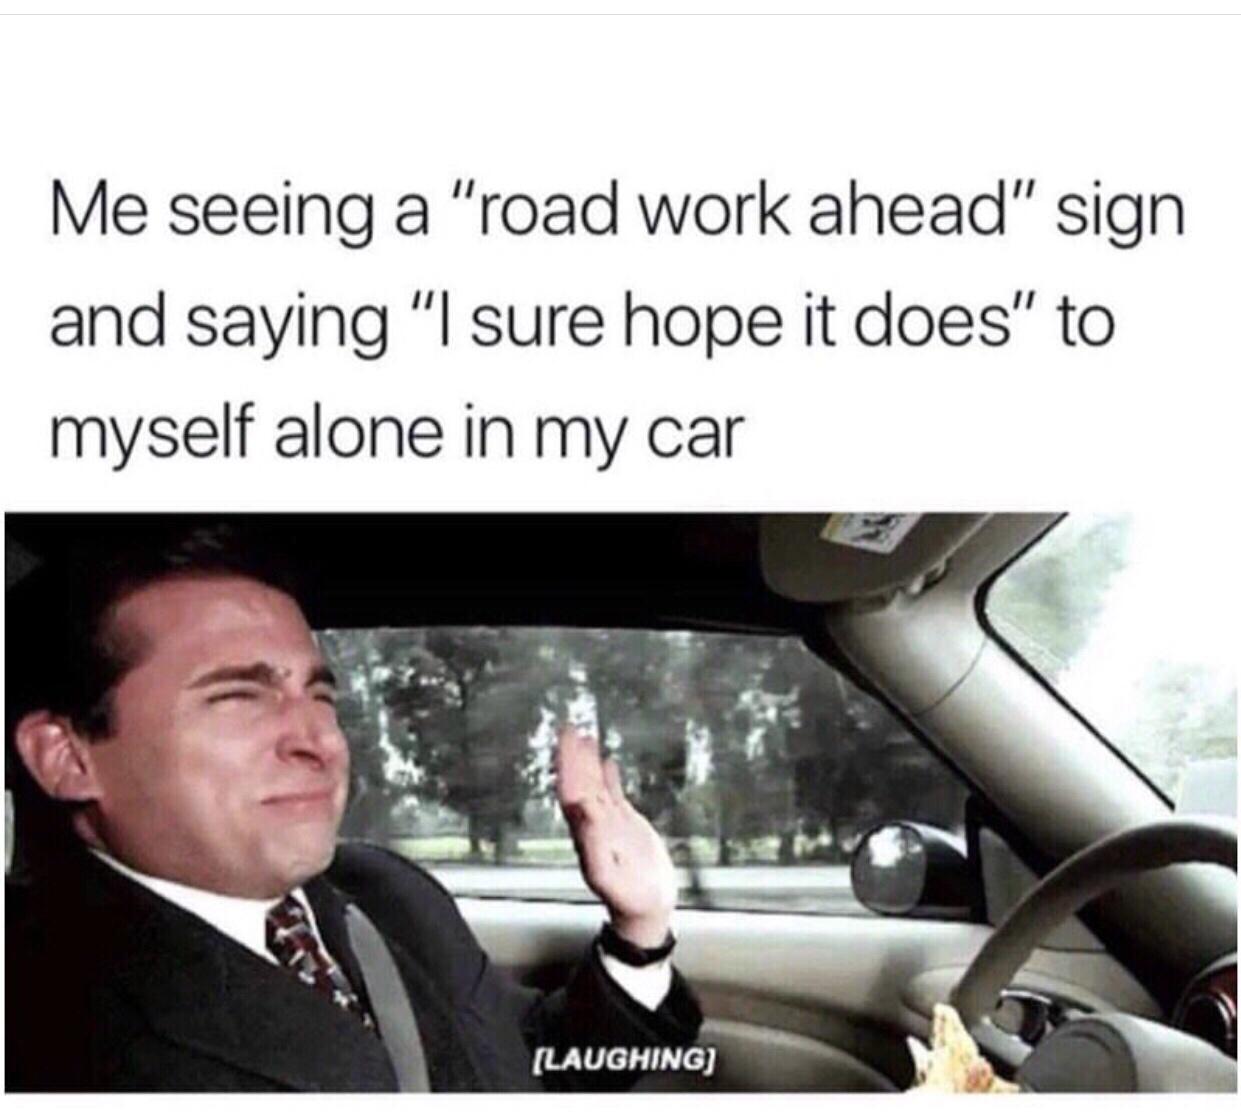 road work ahead meme - Me seeing a "road work ahead" sign and saying "I sure hope it does" to myself alone in my car Laughing